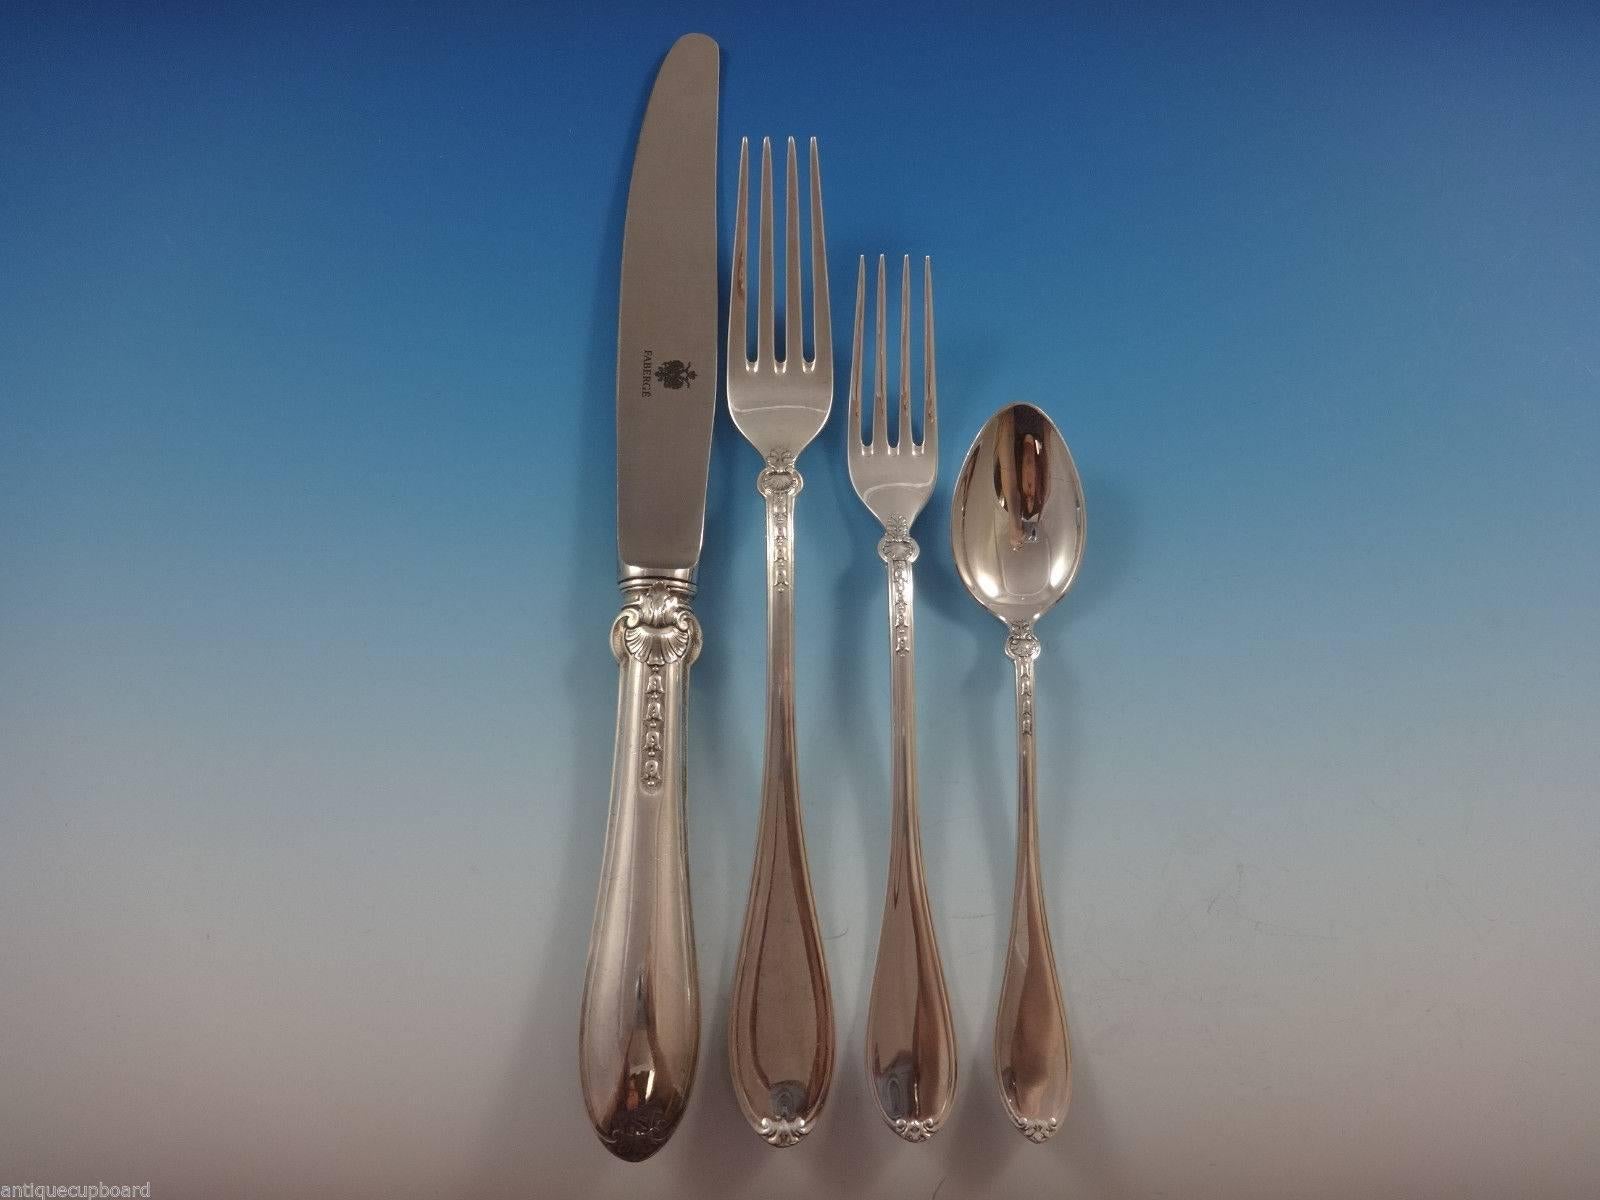 ‘Gatchina palace by Faberge' sterling silver flatware set of 50 pieces. Fabergé is known as the most revered name in luxury. This set includes:

Ten dinner size knives, 9 3/4